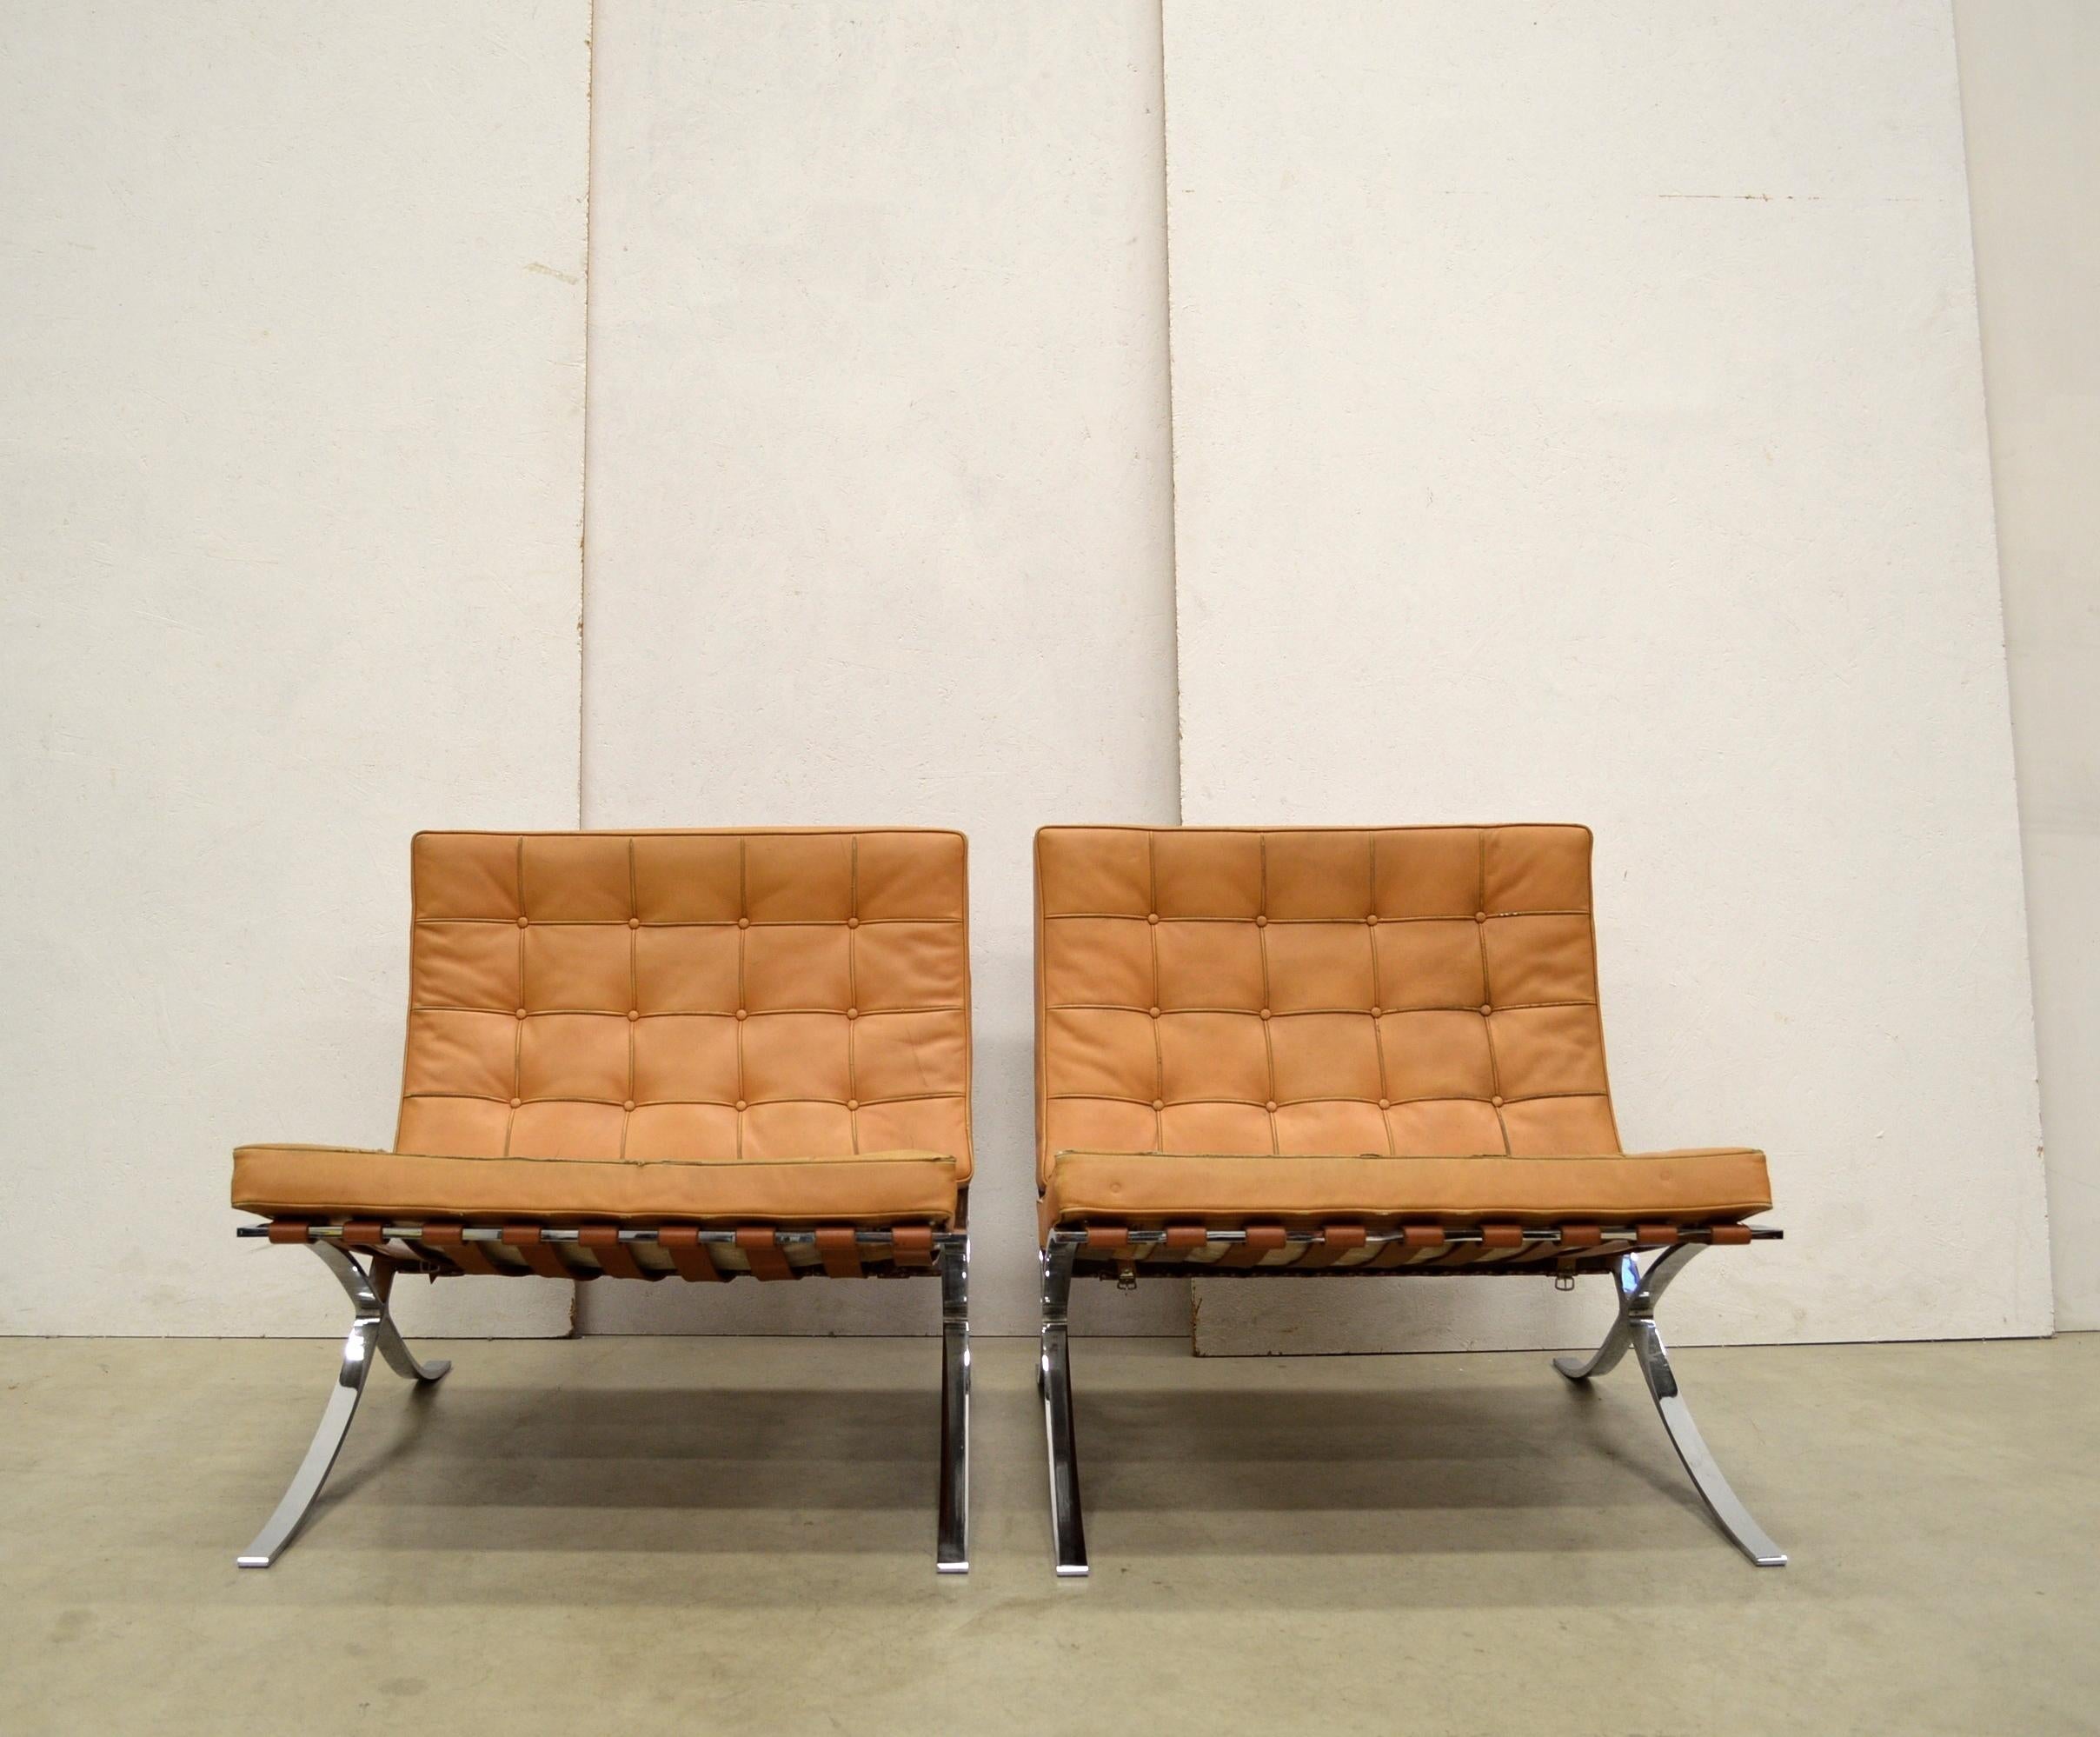 These rare Barcelona chairs were designed by Mies van der Rohe in 1929 and produced by Knoll International in the 1970s. 

The pieces features an amazing hand dyed cognac leather upholstery with on a chromed steel base. 

The Barcelona chairs